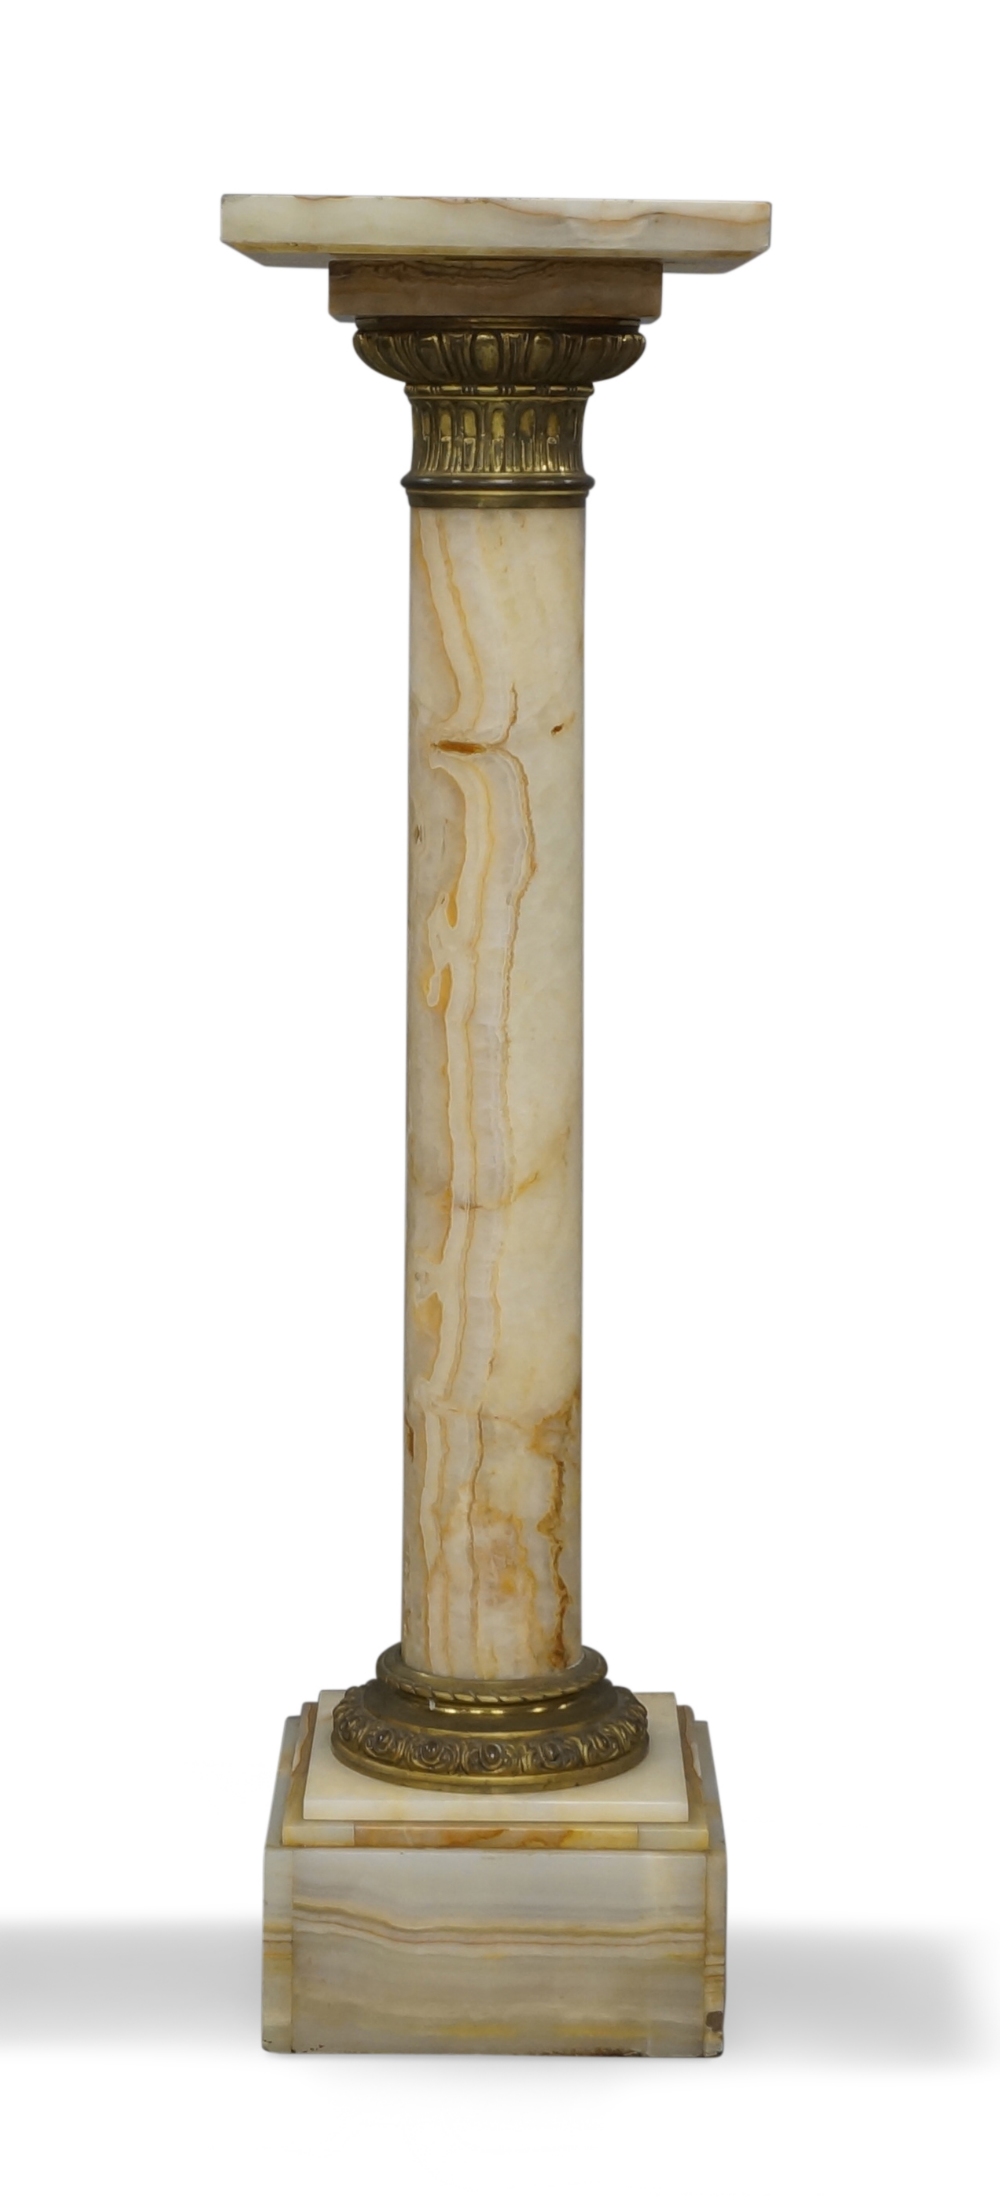 A gilt-bronze mounted onyx column, early 20th century, with stop-fluted capital, 107cm high, the